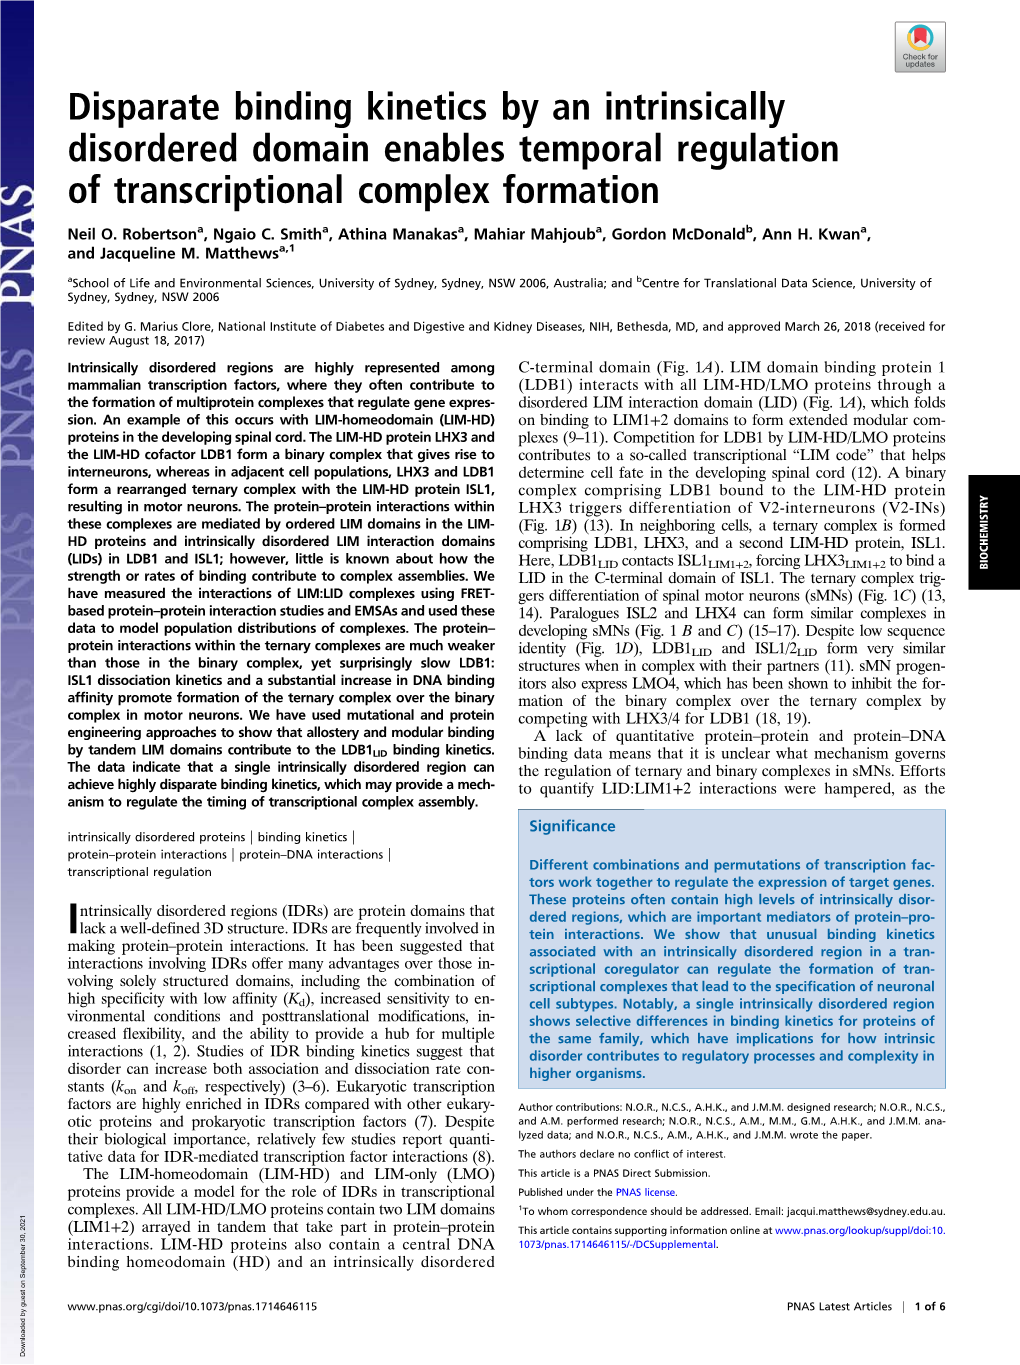 Disparate Binding Kinetics by an Intrinsically Disordered Domain Enables Temporal Regulation of Transcriptional Complex Formation